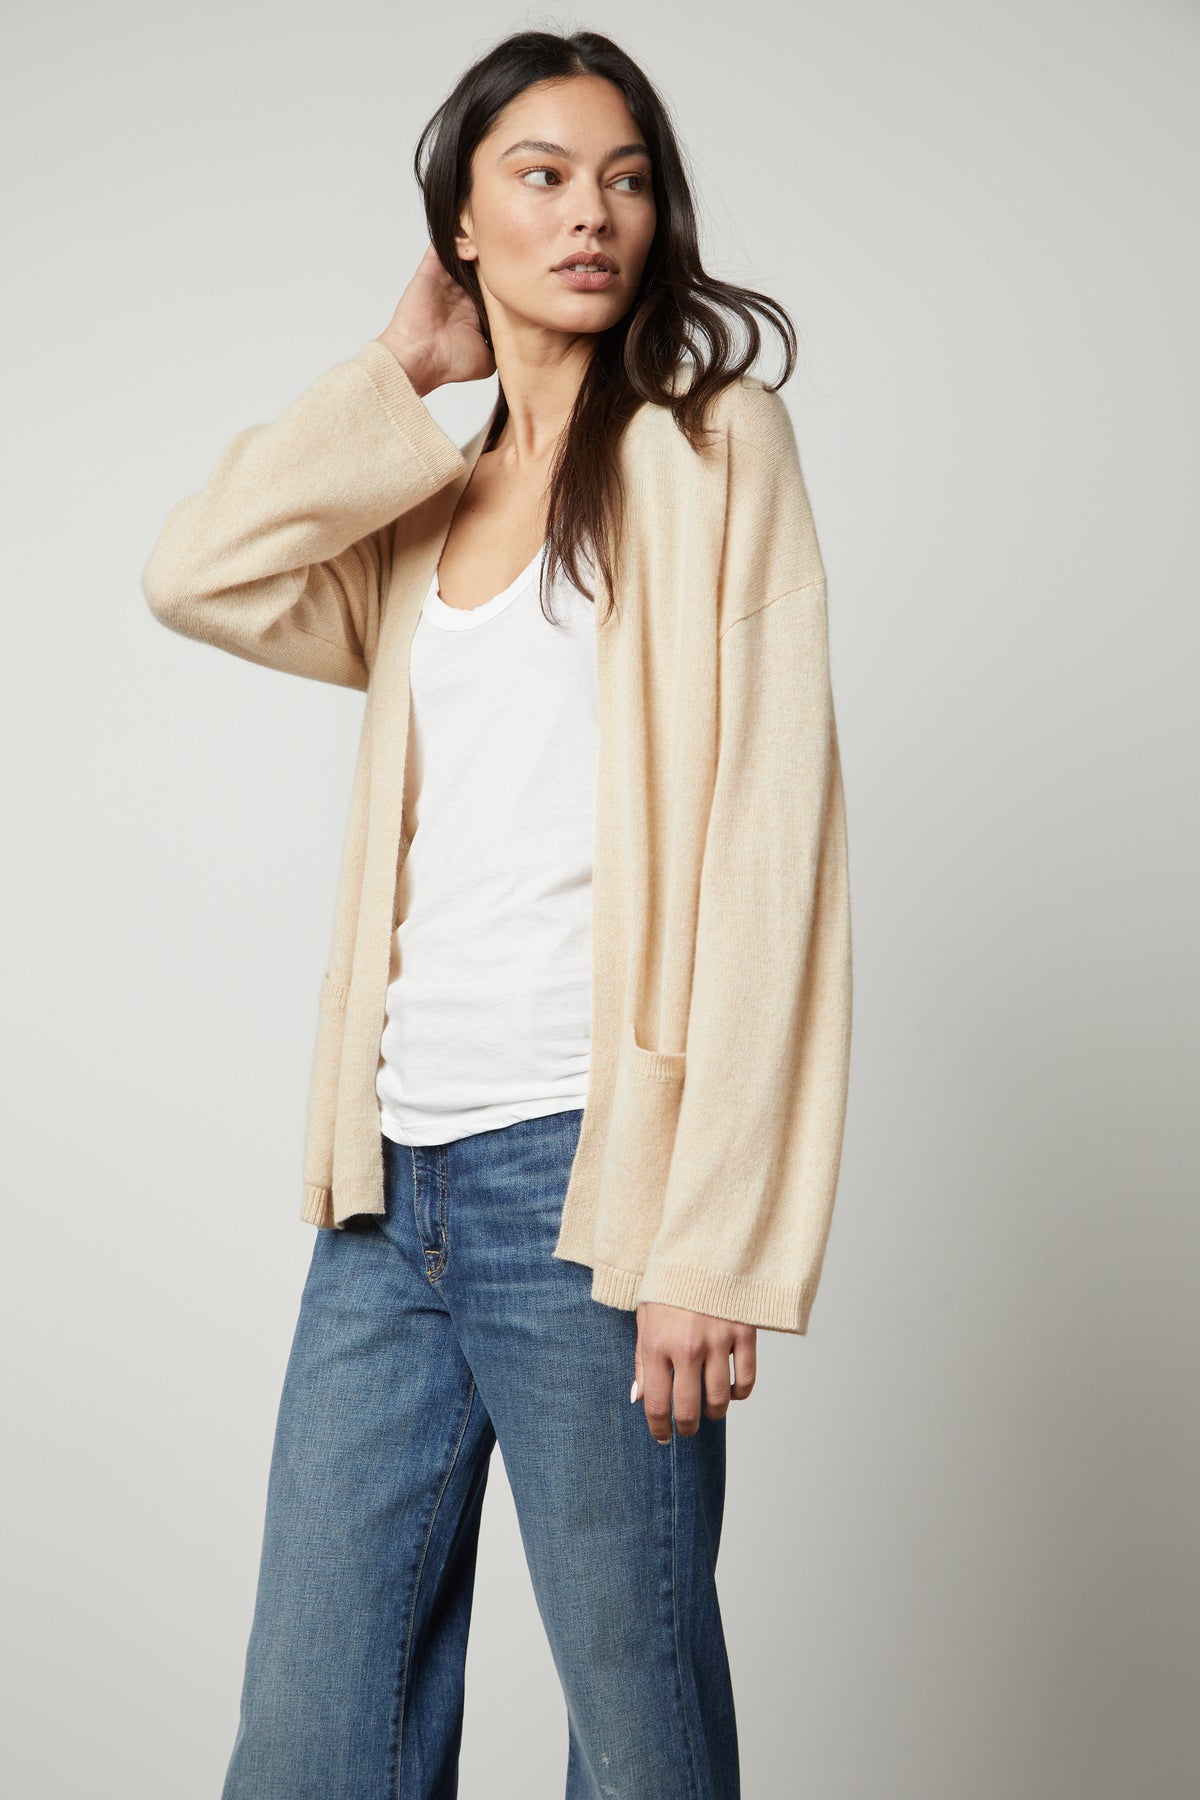 The model is wearing jeans and a Velvet by Graham & Spencer LILA CASHMERE CARDIGAN.-26910345789633